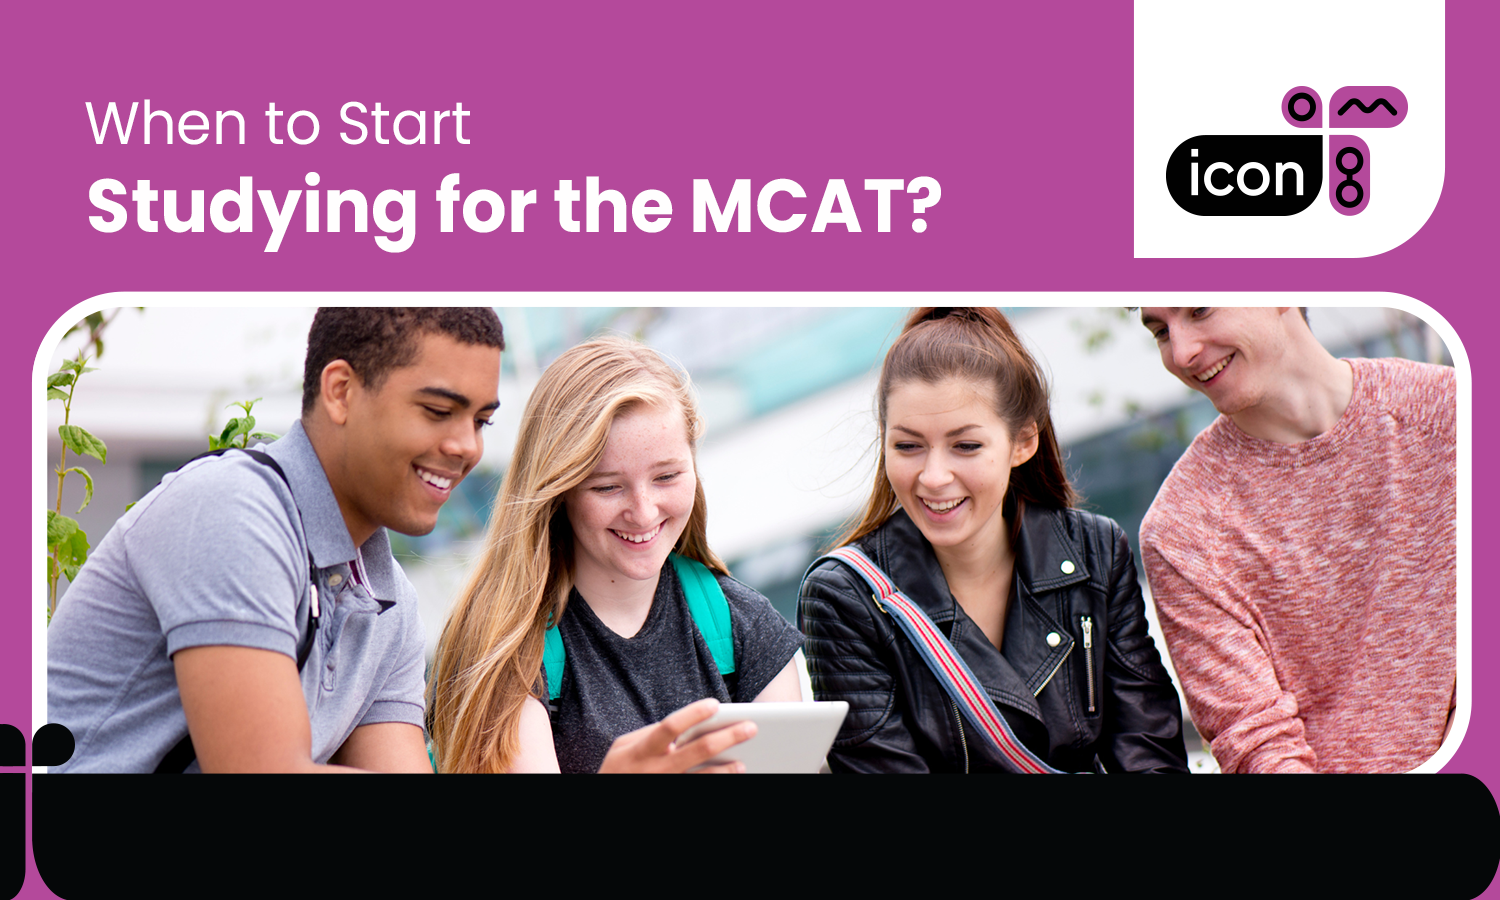 When to start studying for the MCAT?